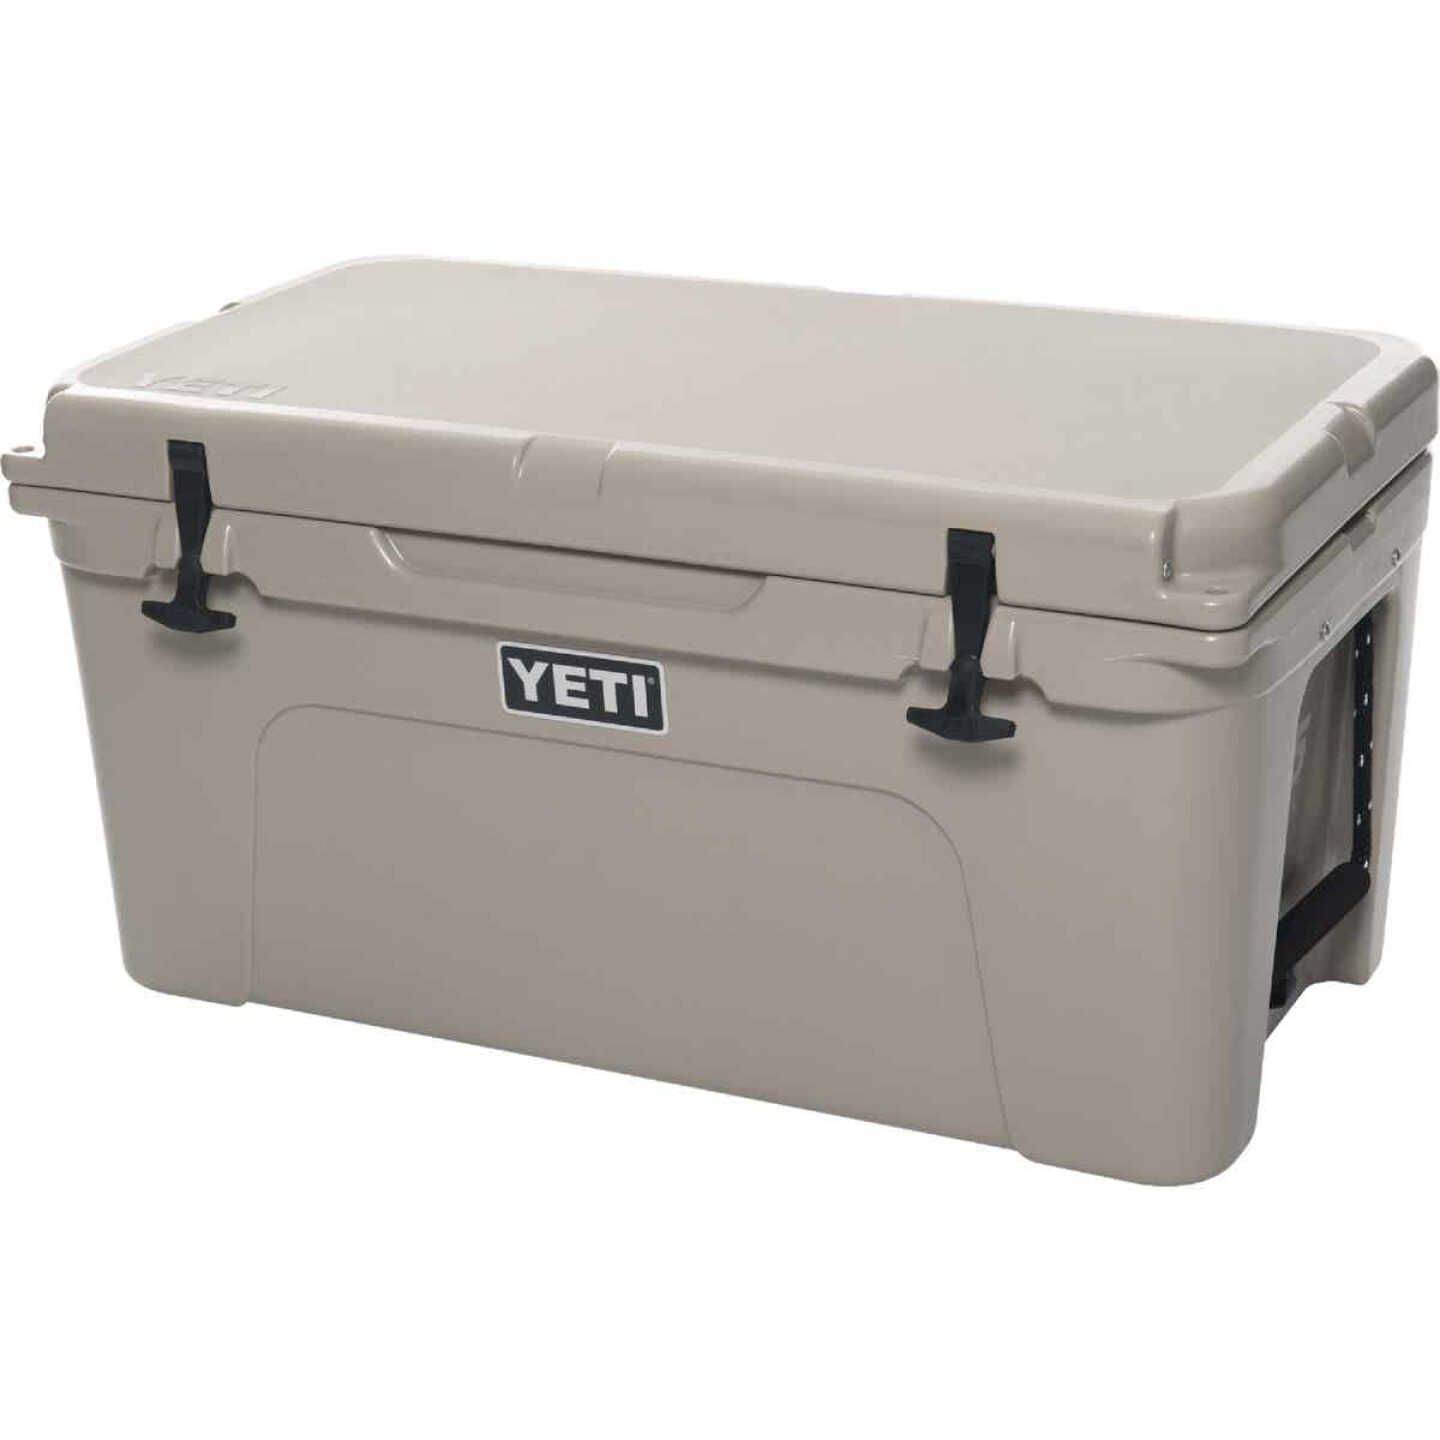 Yeti Tundra 65 Series 10065280000 Chest Cooler, 42 Can Co